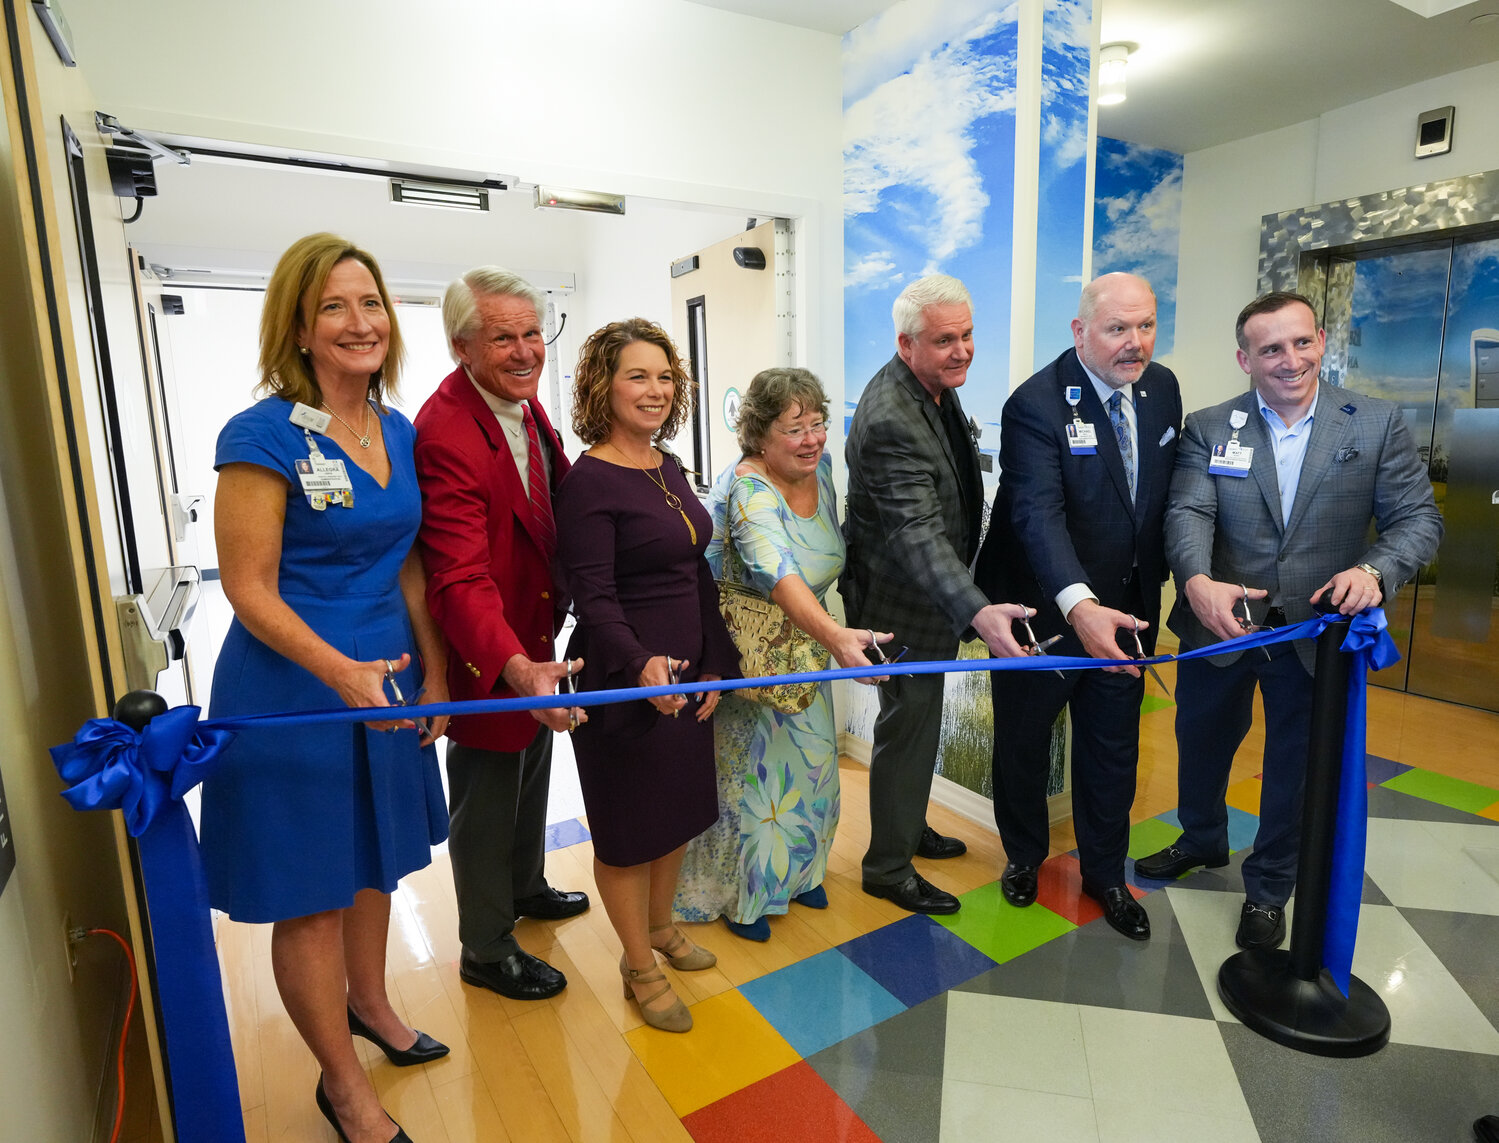 Baptist Health and Wolfson Children's Hospital leaders with members of THE PLAYERS Championship Village Board cut the ribbon on the new unit.